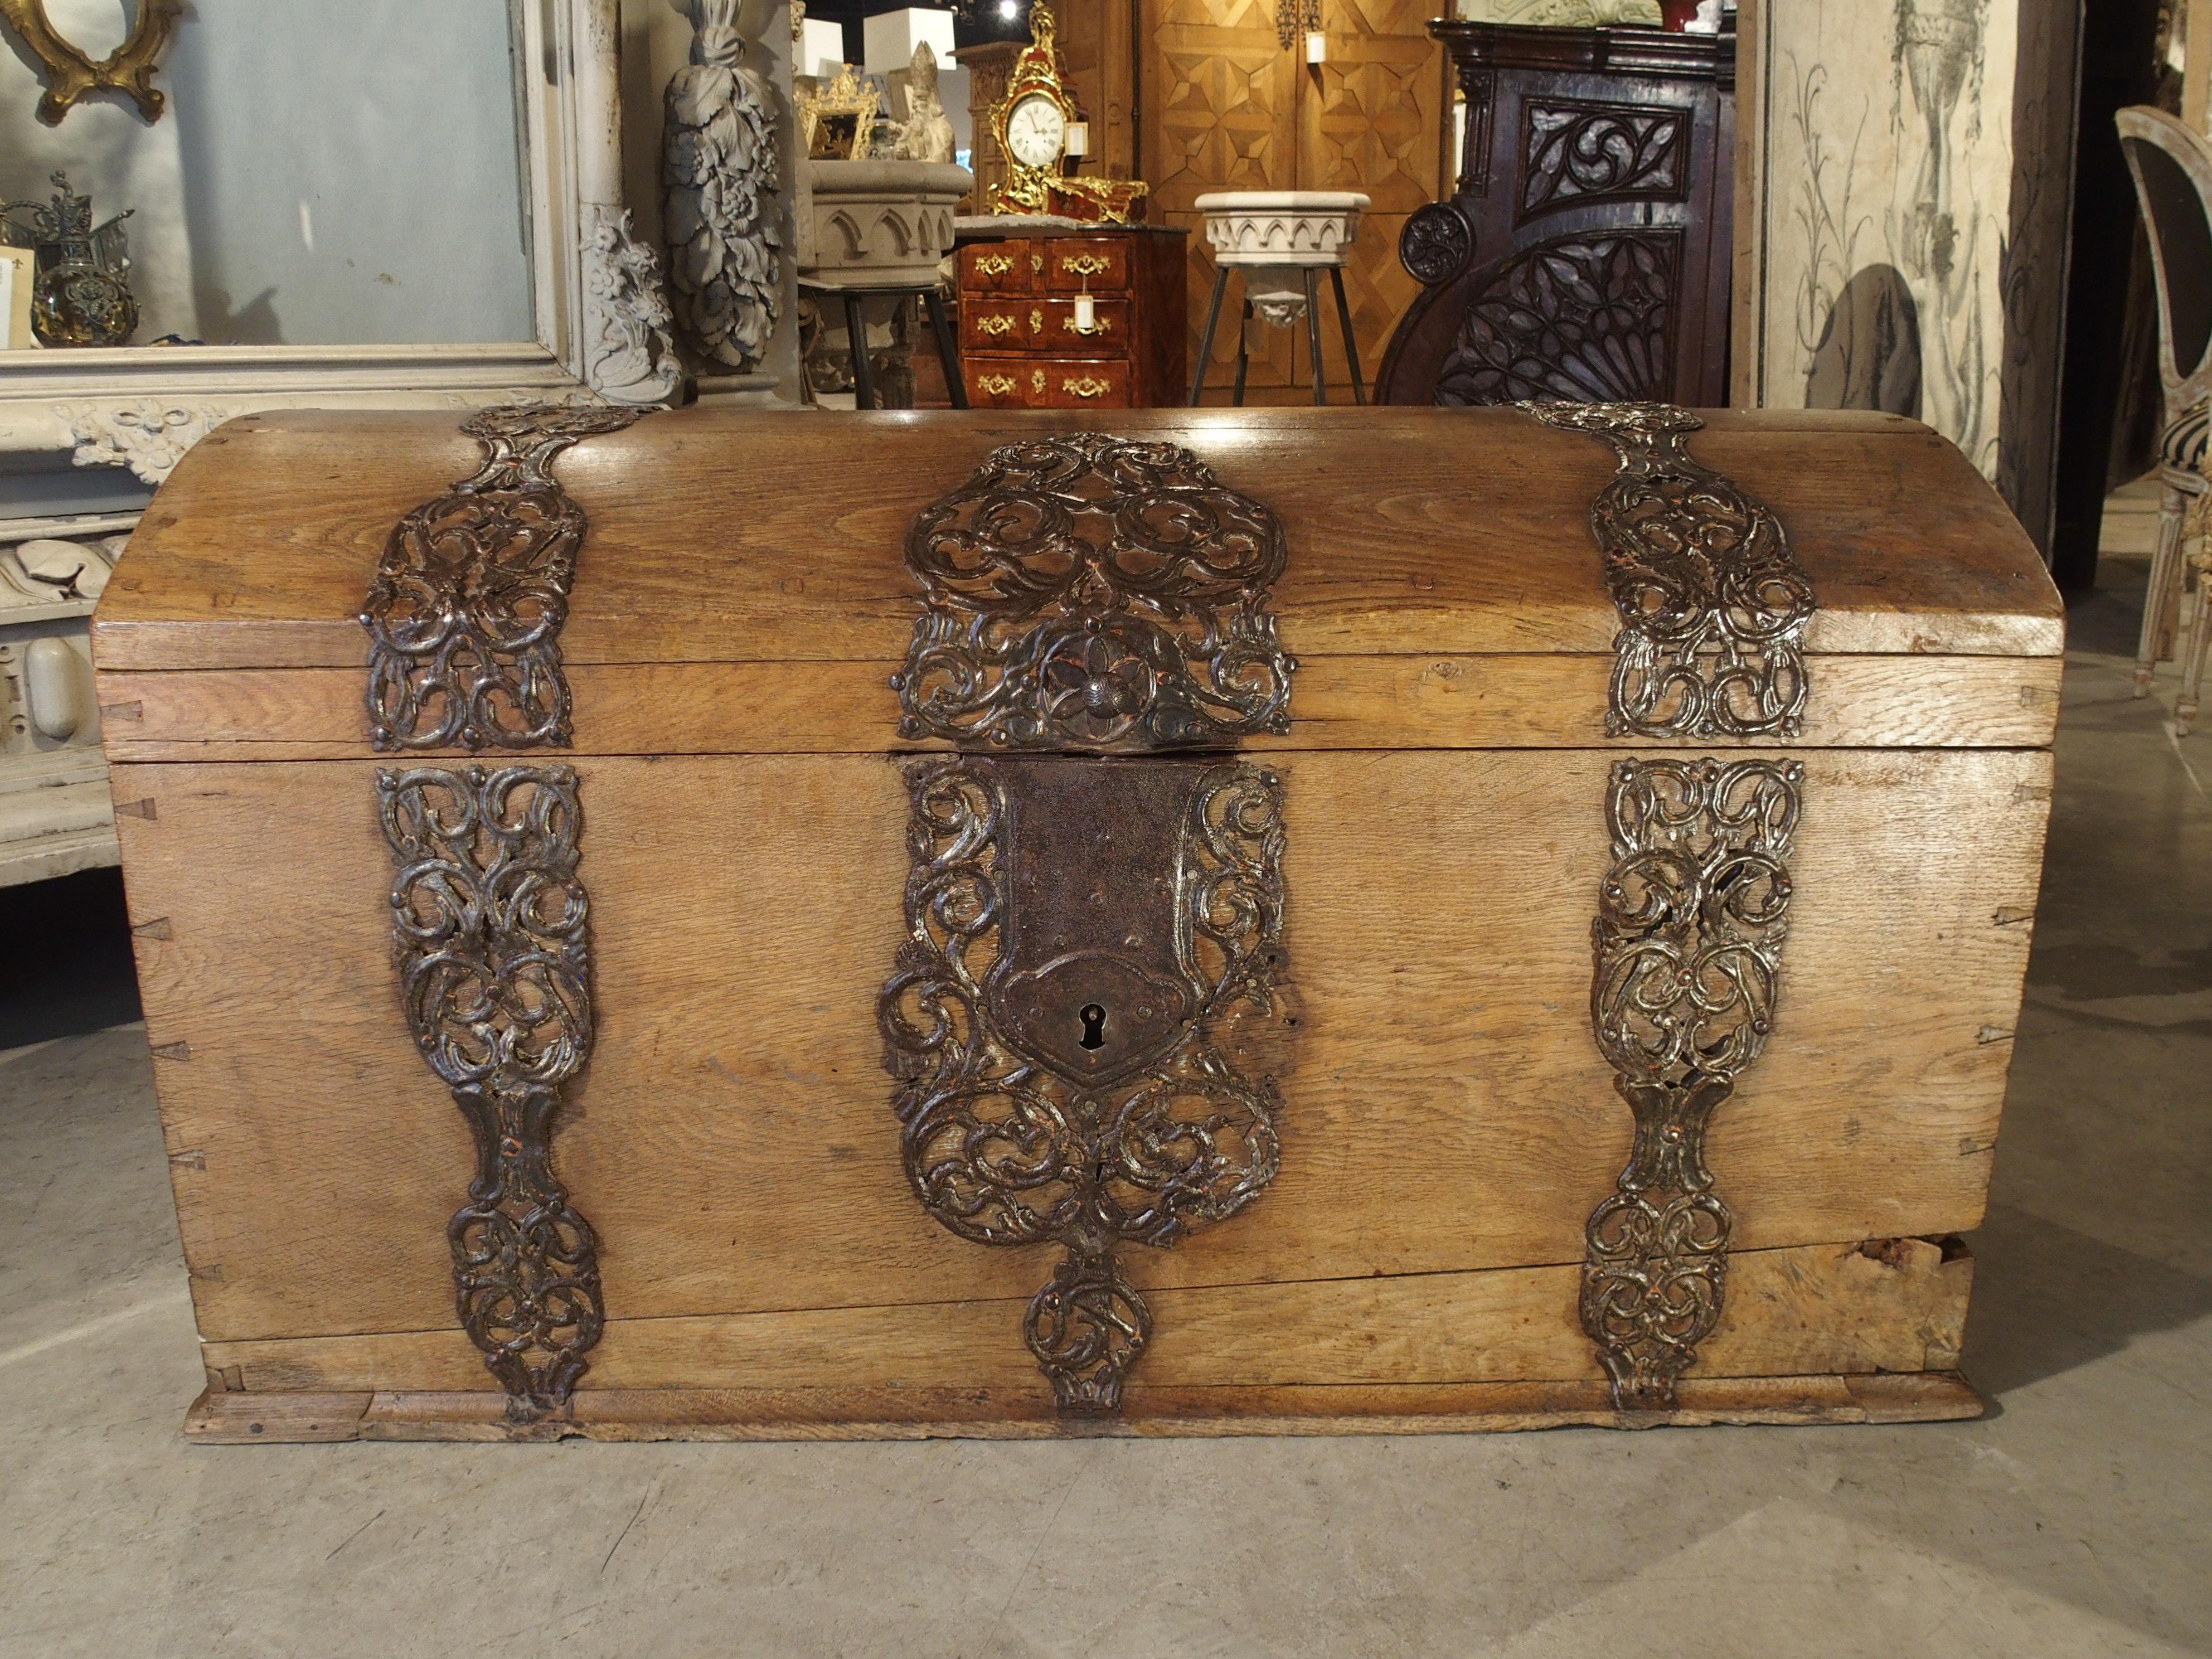 Early 18th Century Large Domed Oak German Baroque Trunk with Decorative Iron Strapwork, circa 1700